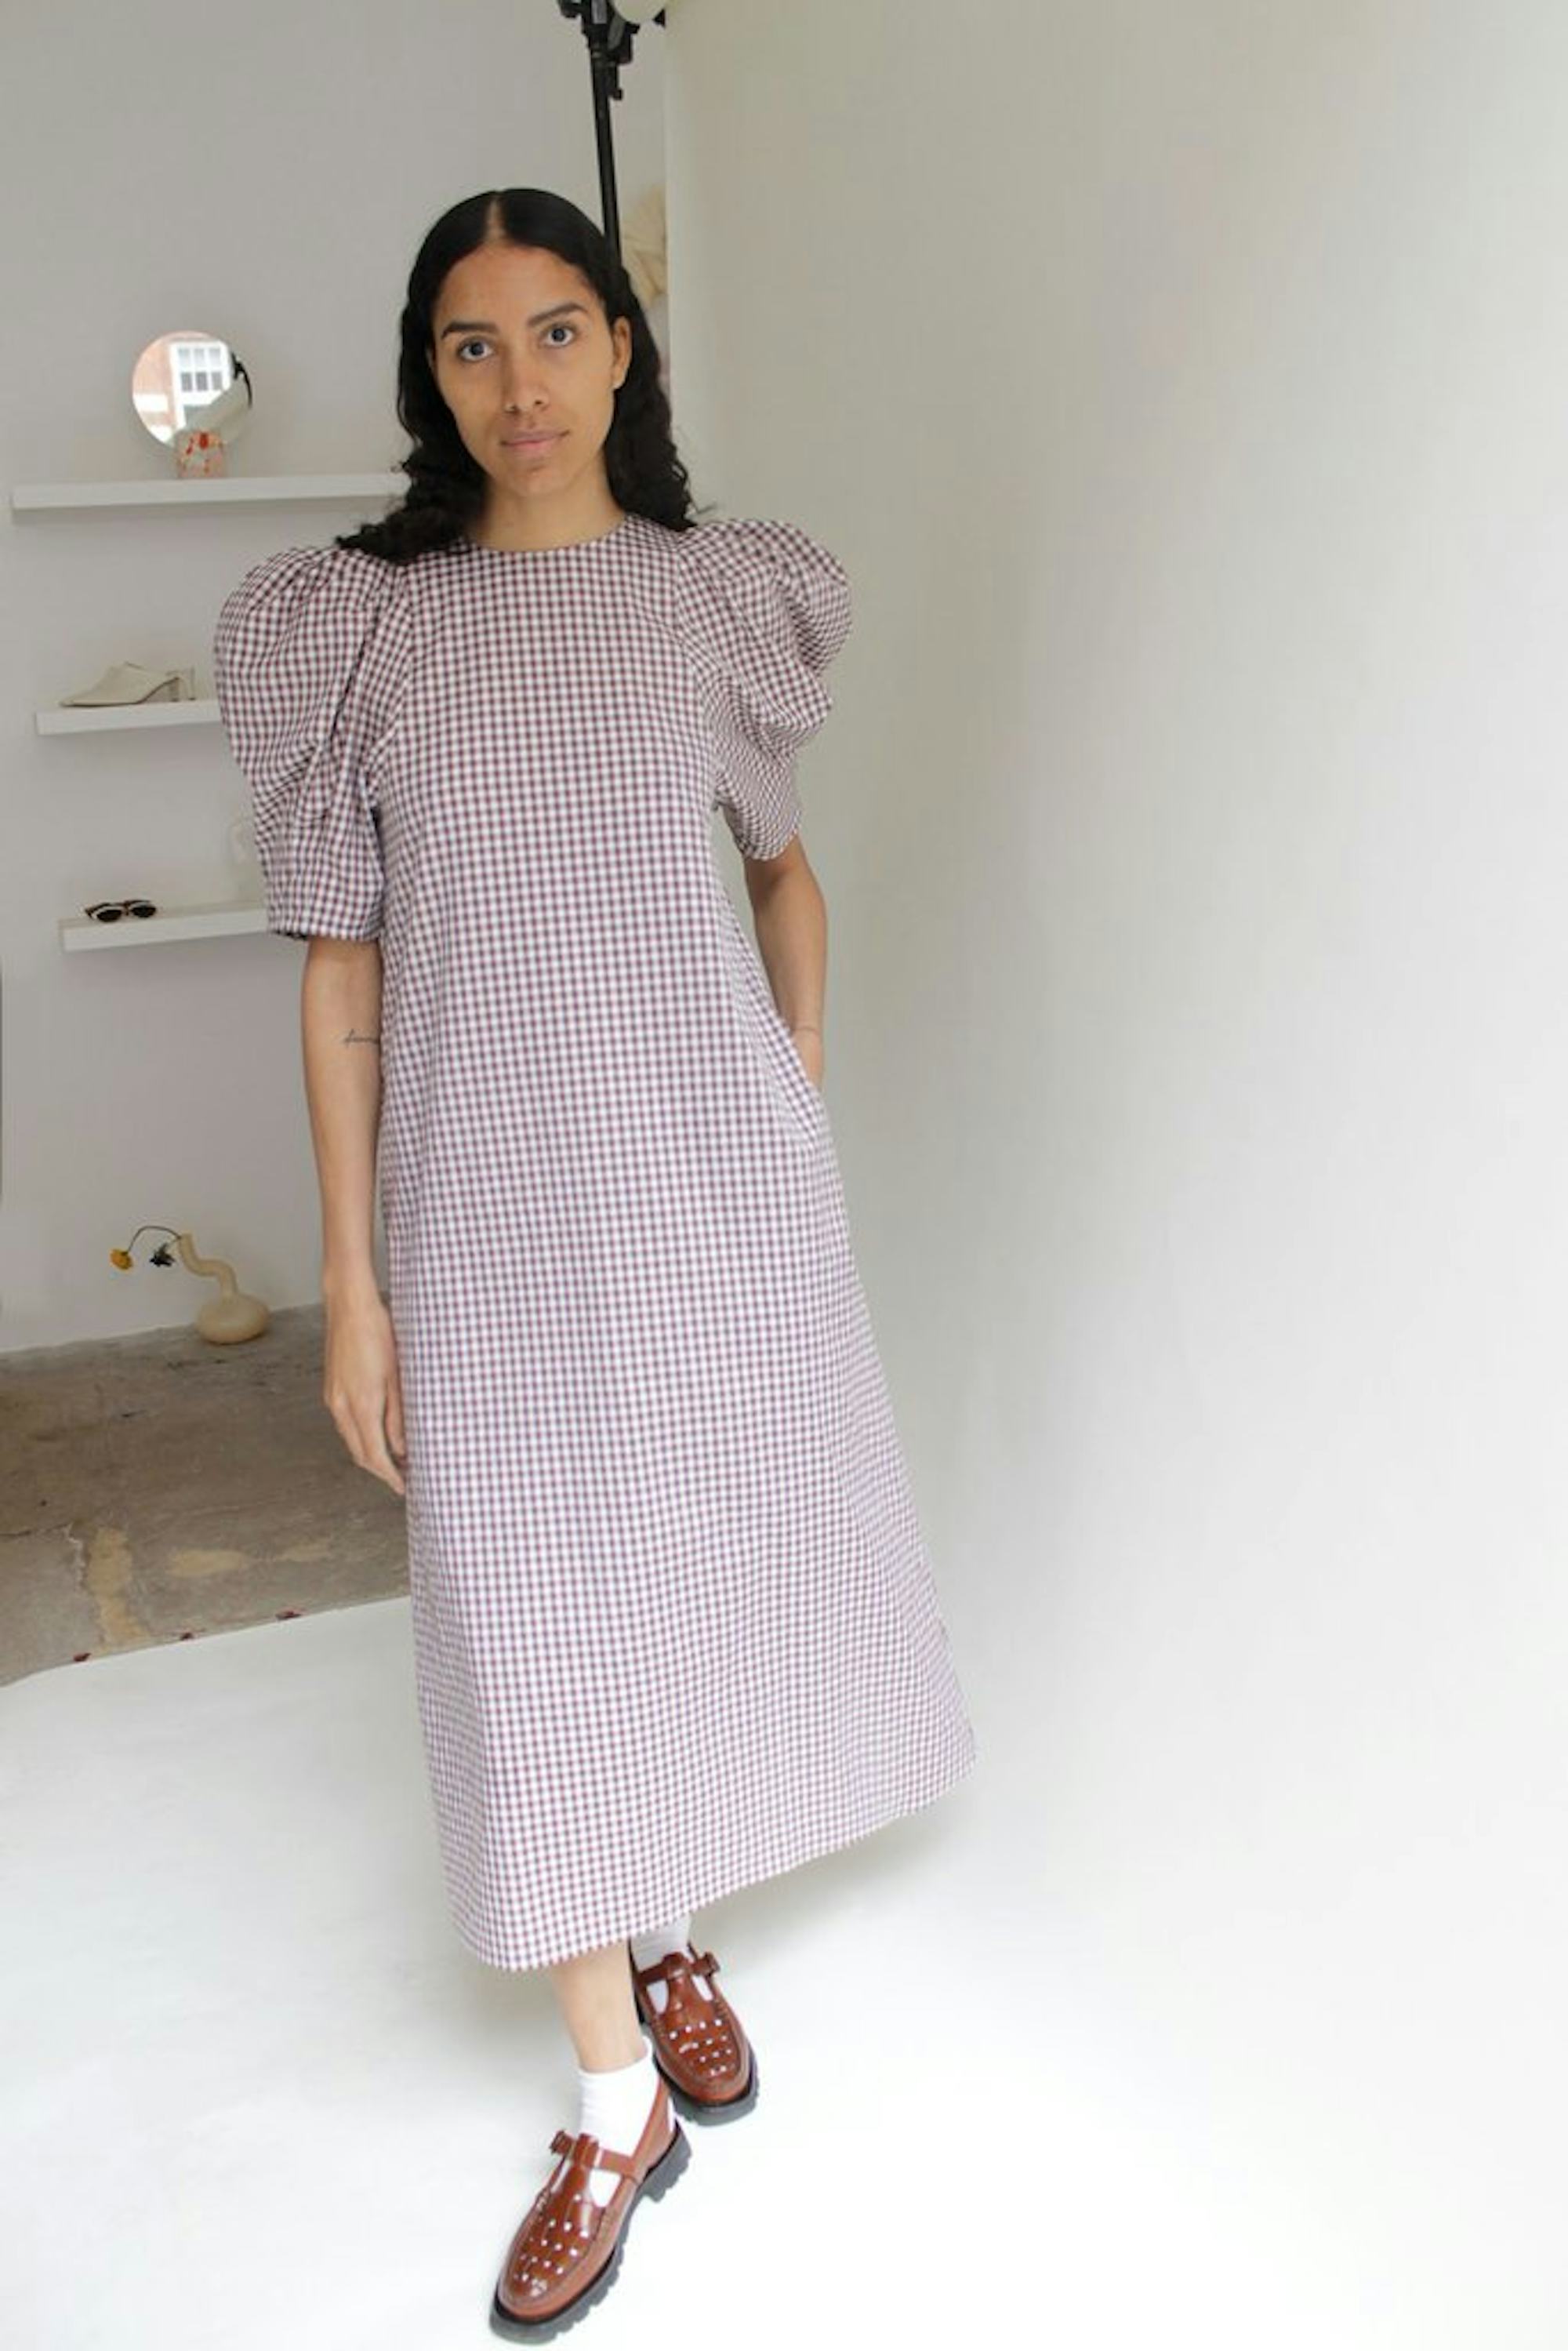 Cottagecore Dresses That Channel The Internet’s Favorite Fashion Aesthetic